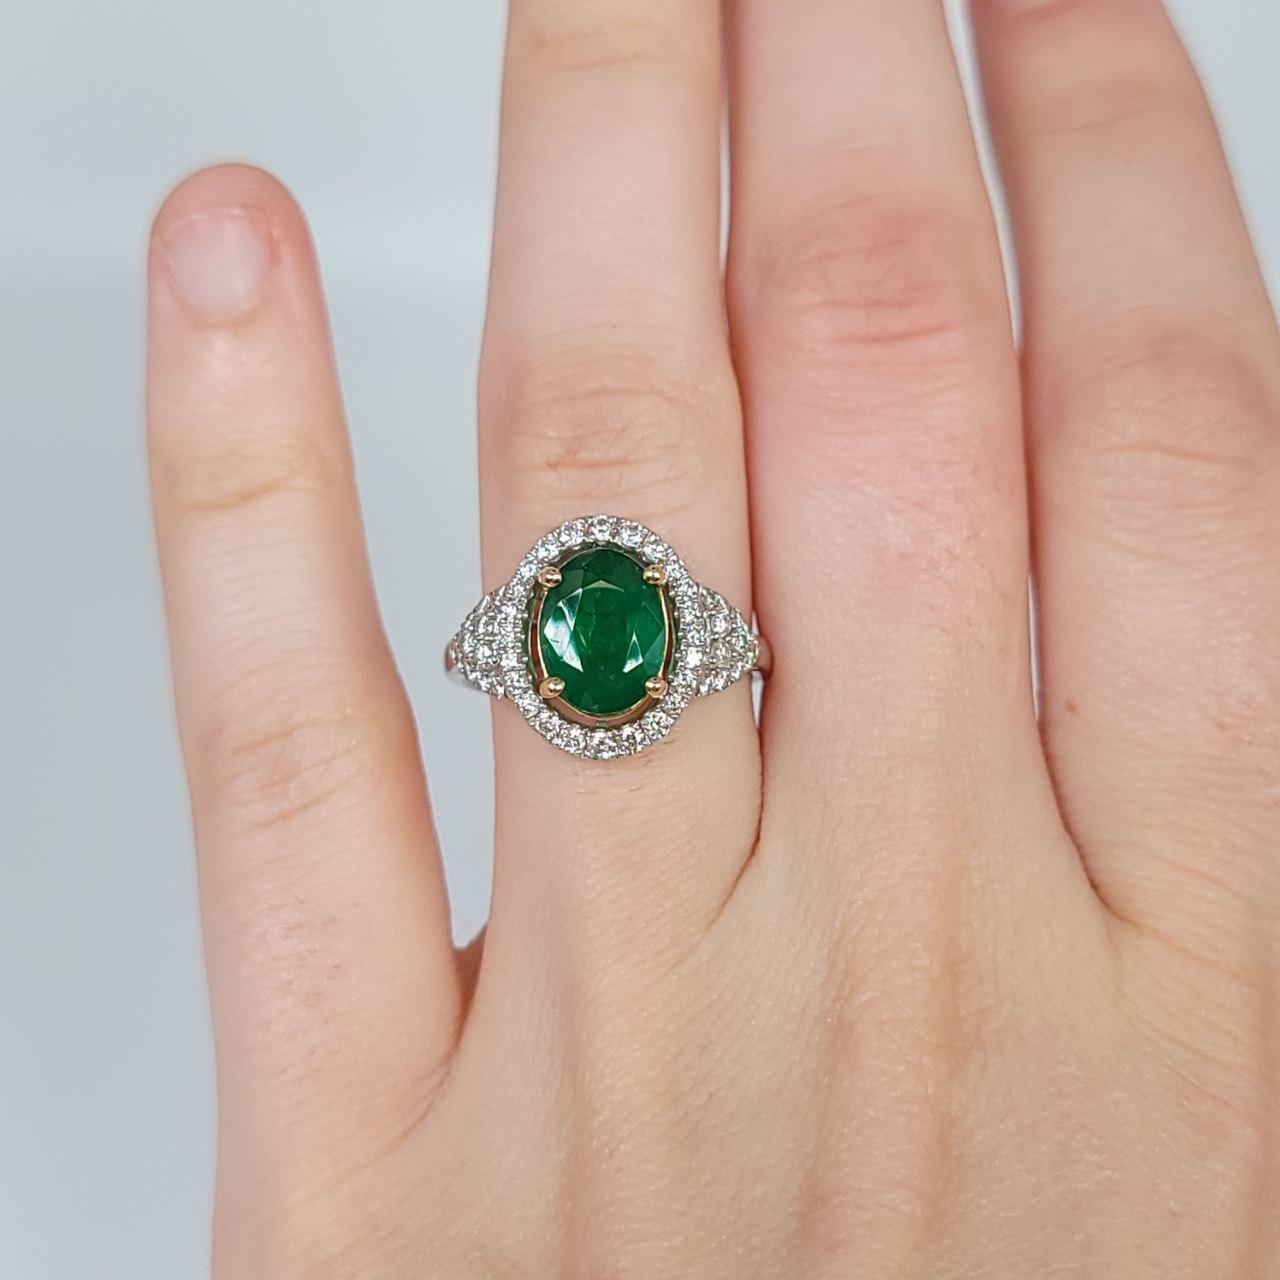 

GRAM WEIGHT: 4.10gr
GOLD: 14KT yellow gold

NATURAL DIAMOND(S)
Cut: Round Brilliant
Color: G-H 
Clarity: SI (average)
Carat: 0.61ct

NATURAL EMERALD(S)
Cut: Oval 
Color: Green
Clarity: Moderately Included (normal for natural gemstones and common